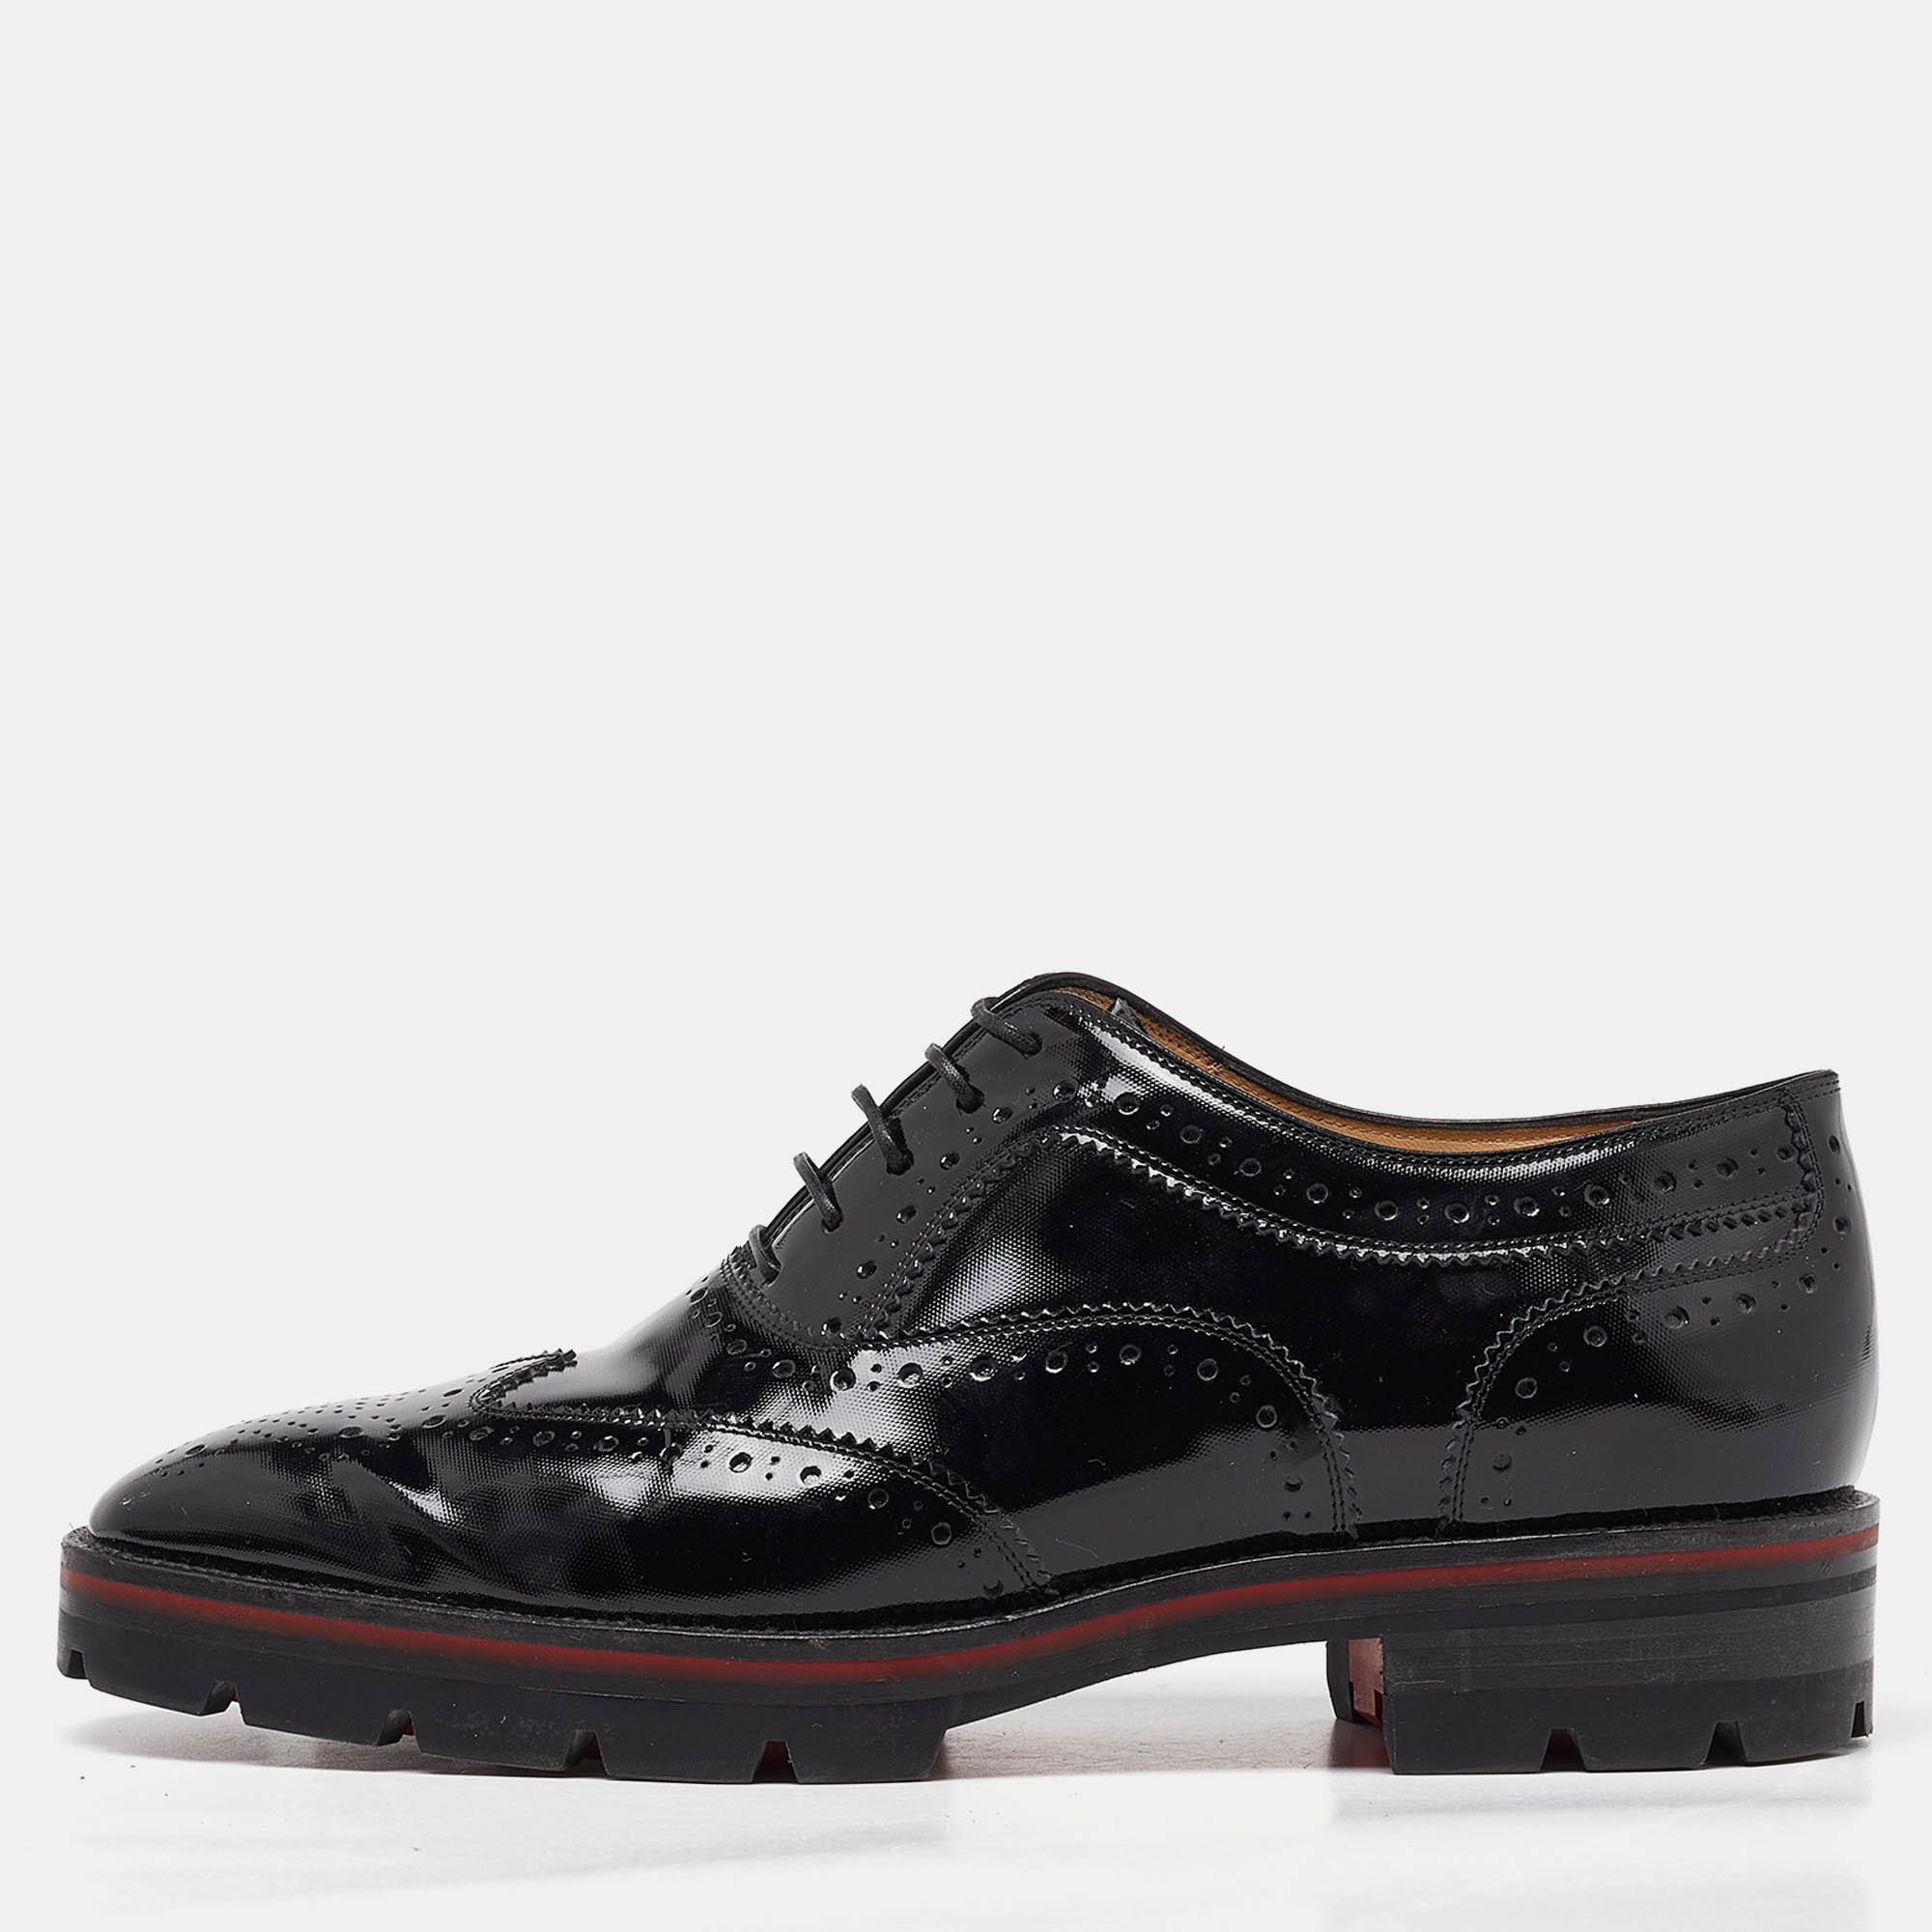 Pre-owned Christian Louboutin Black Brogue Patent Leather Charletta Lace Up Oxfords Size 38